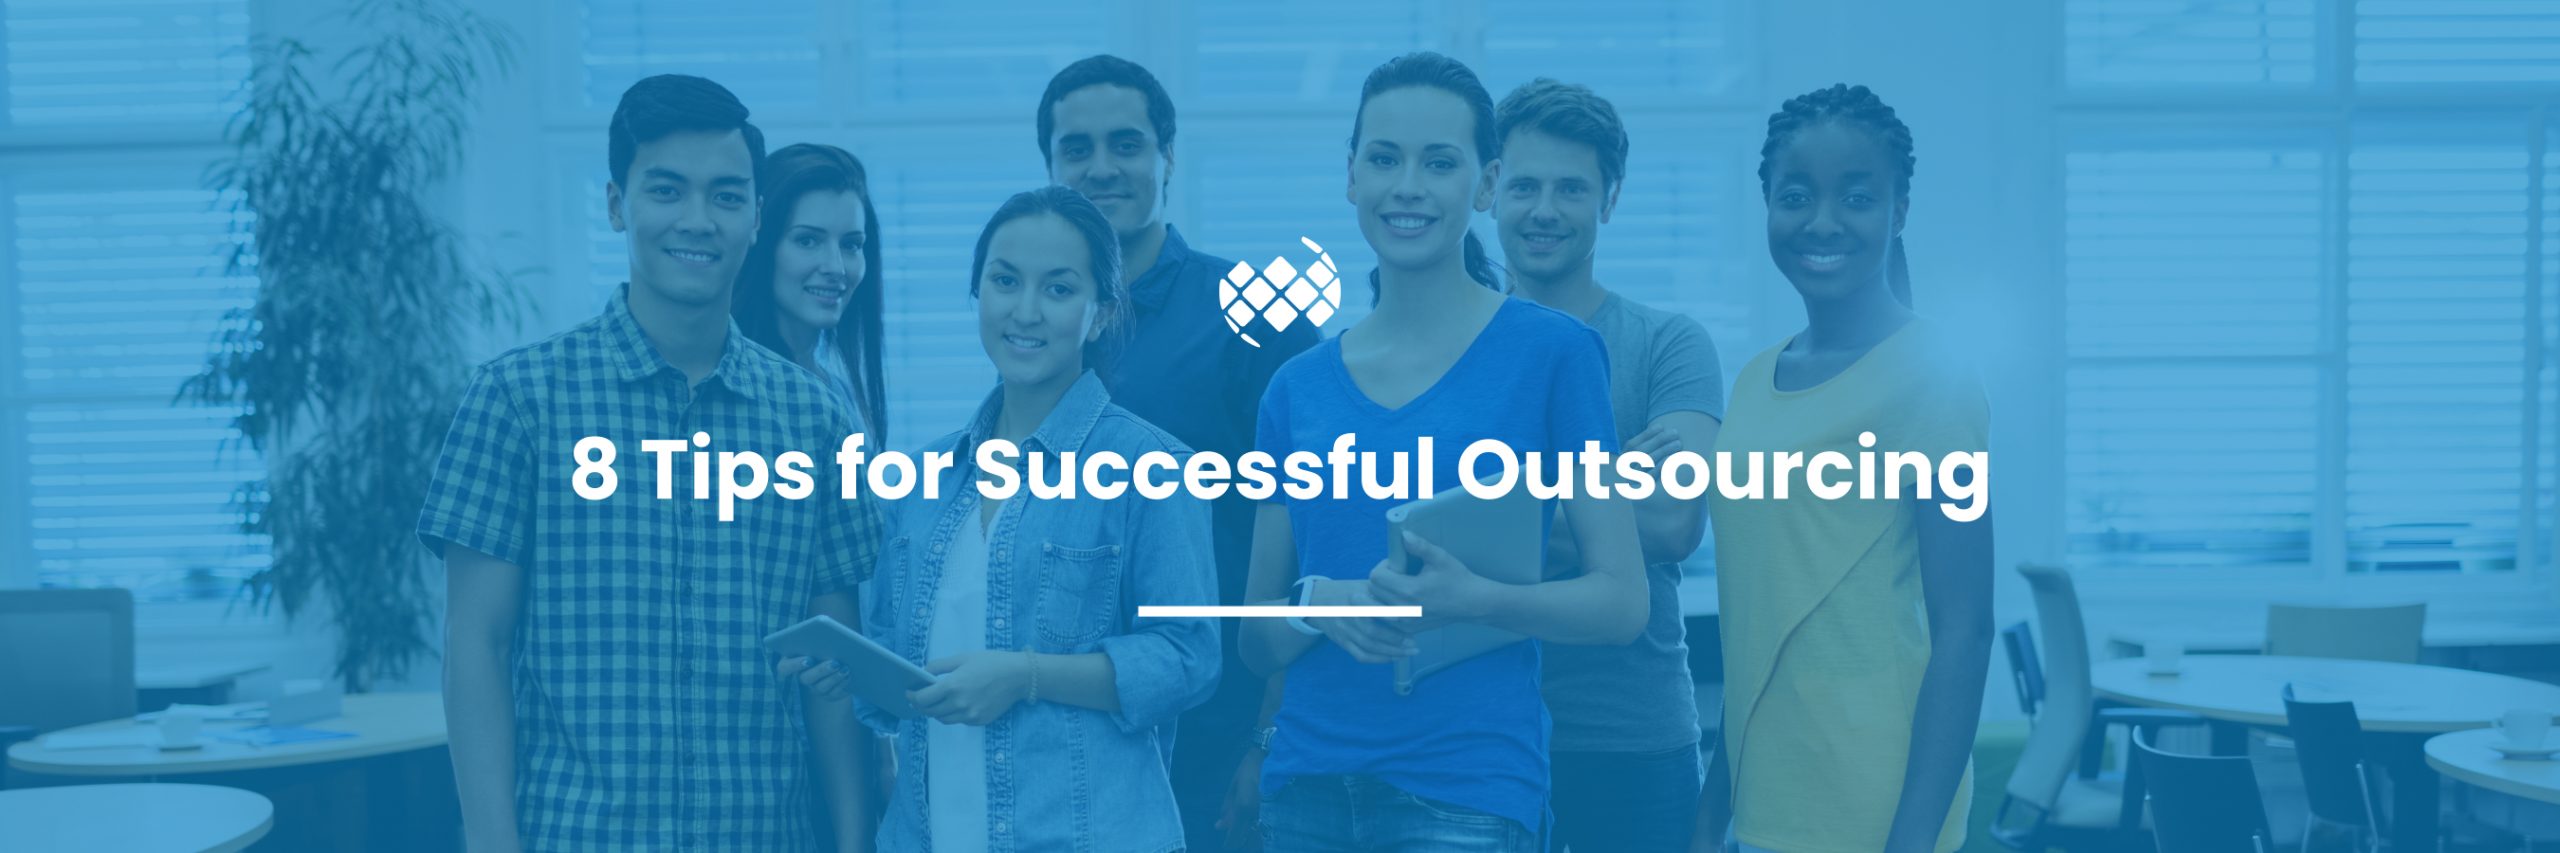 Tips for successful outsourcing